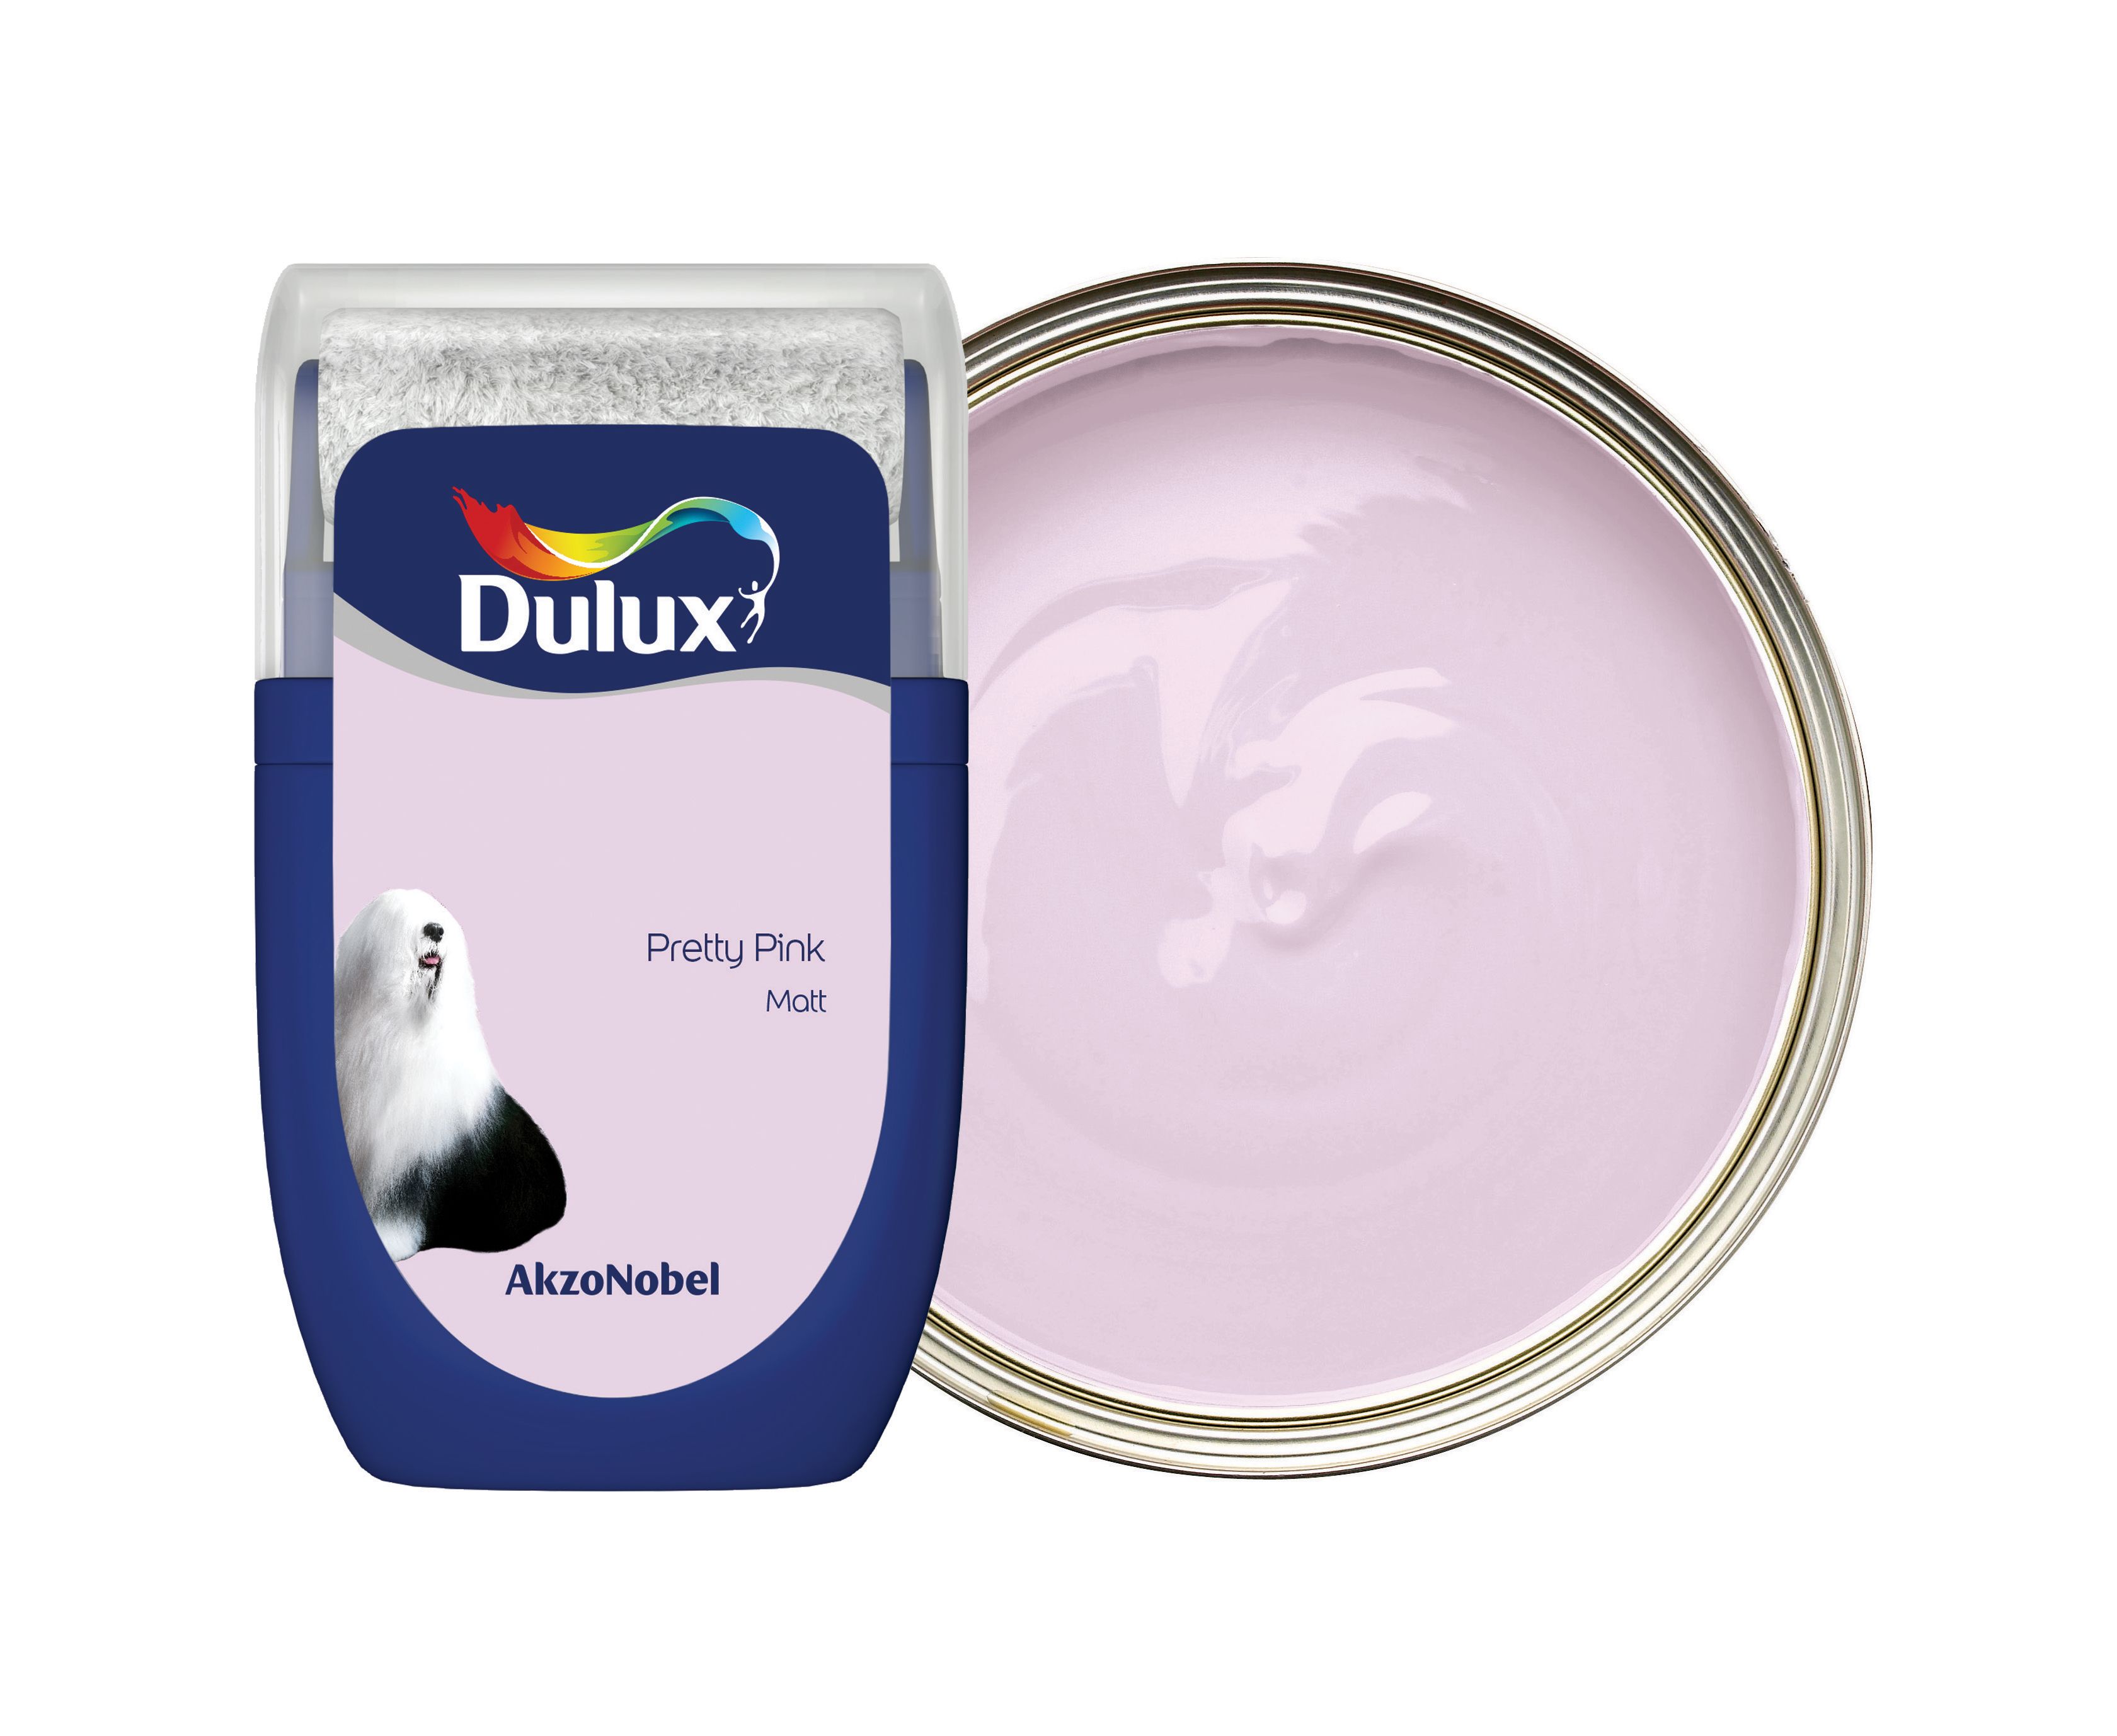 Image of Dulux Emulsion Paint - Pretty Pink Tester Pot - 30ml